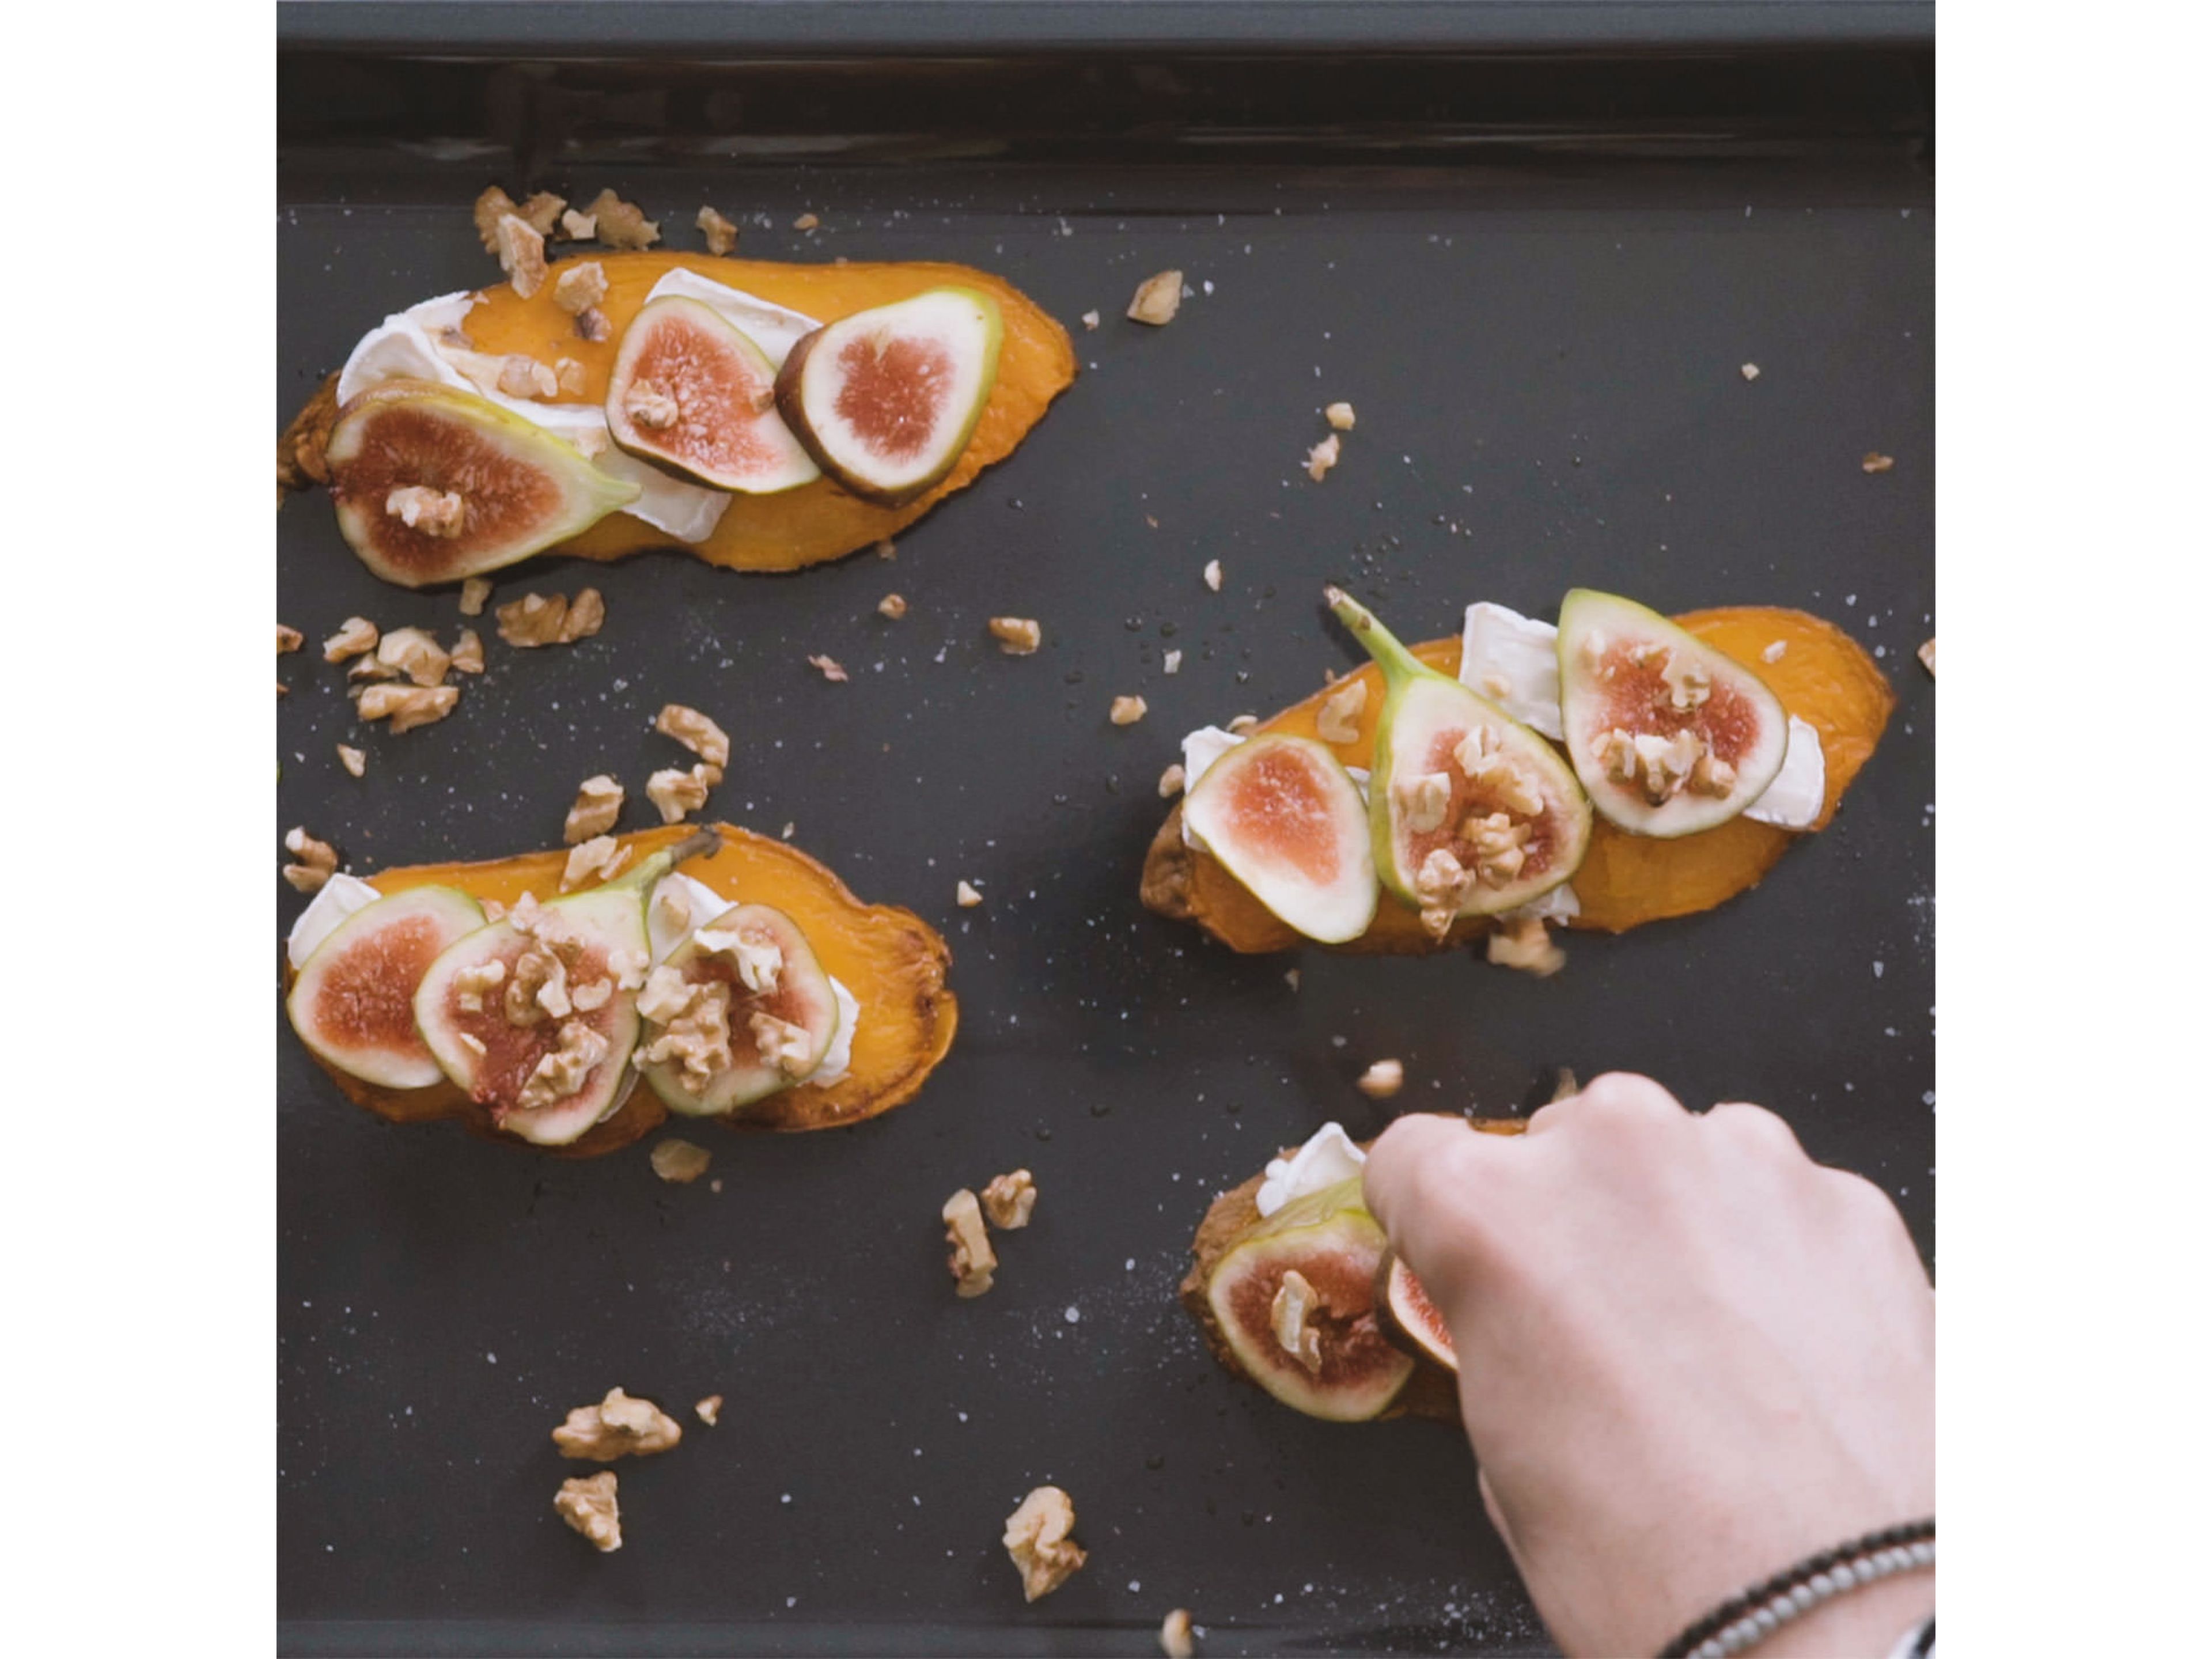 Cut goat cheese and figs into thin slices. While sweet potato slices are still hot, top with sliced goat cheese, figs, and walnuts. Return to oven and bake at 200°C/390°F for approx. 8 min., or until cheese is melted.